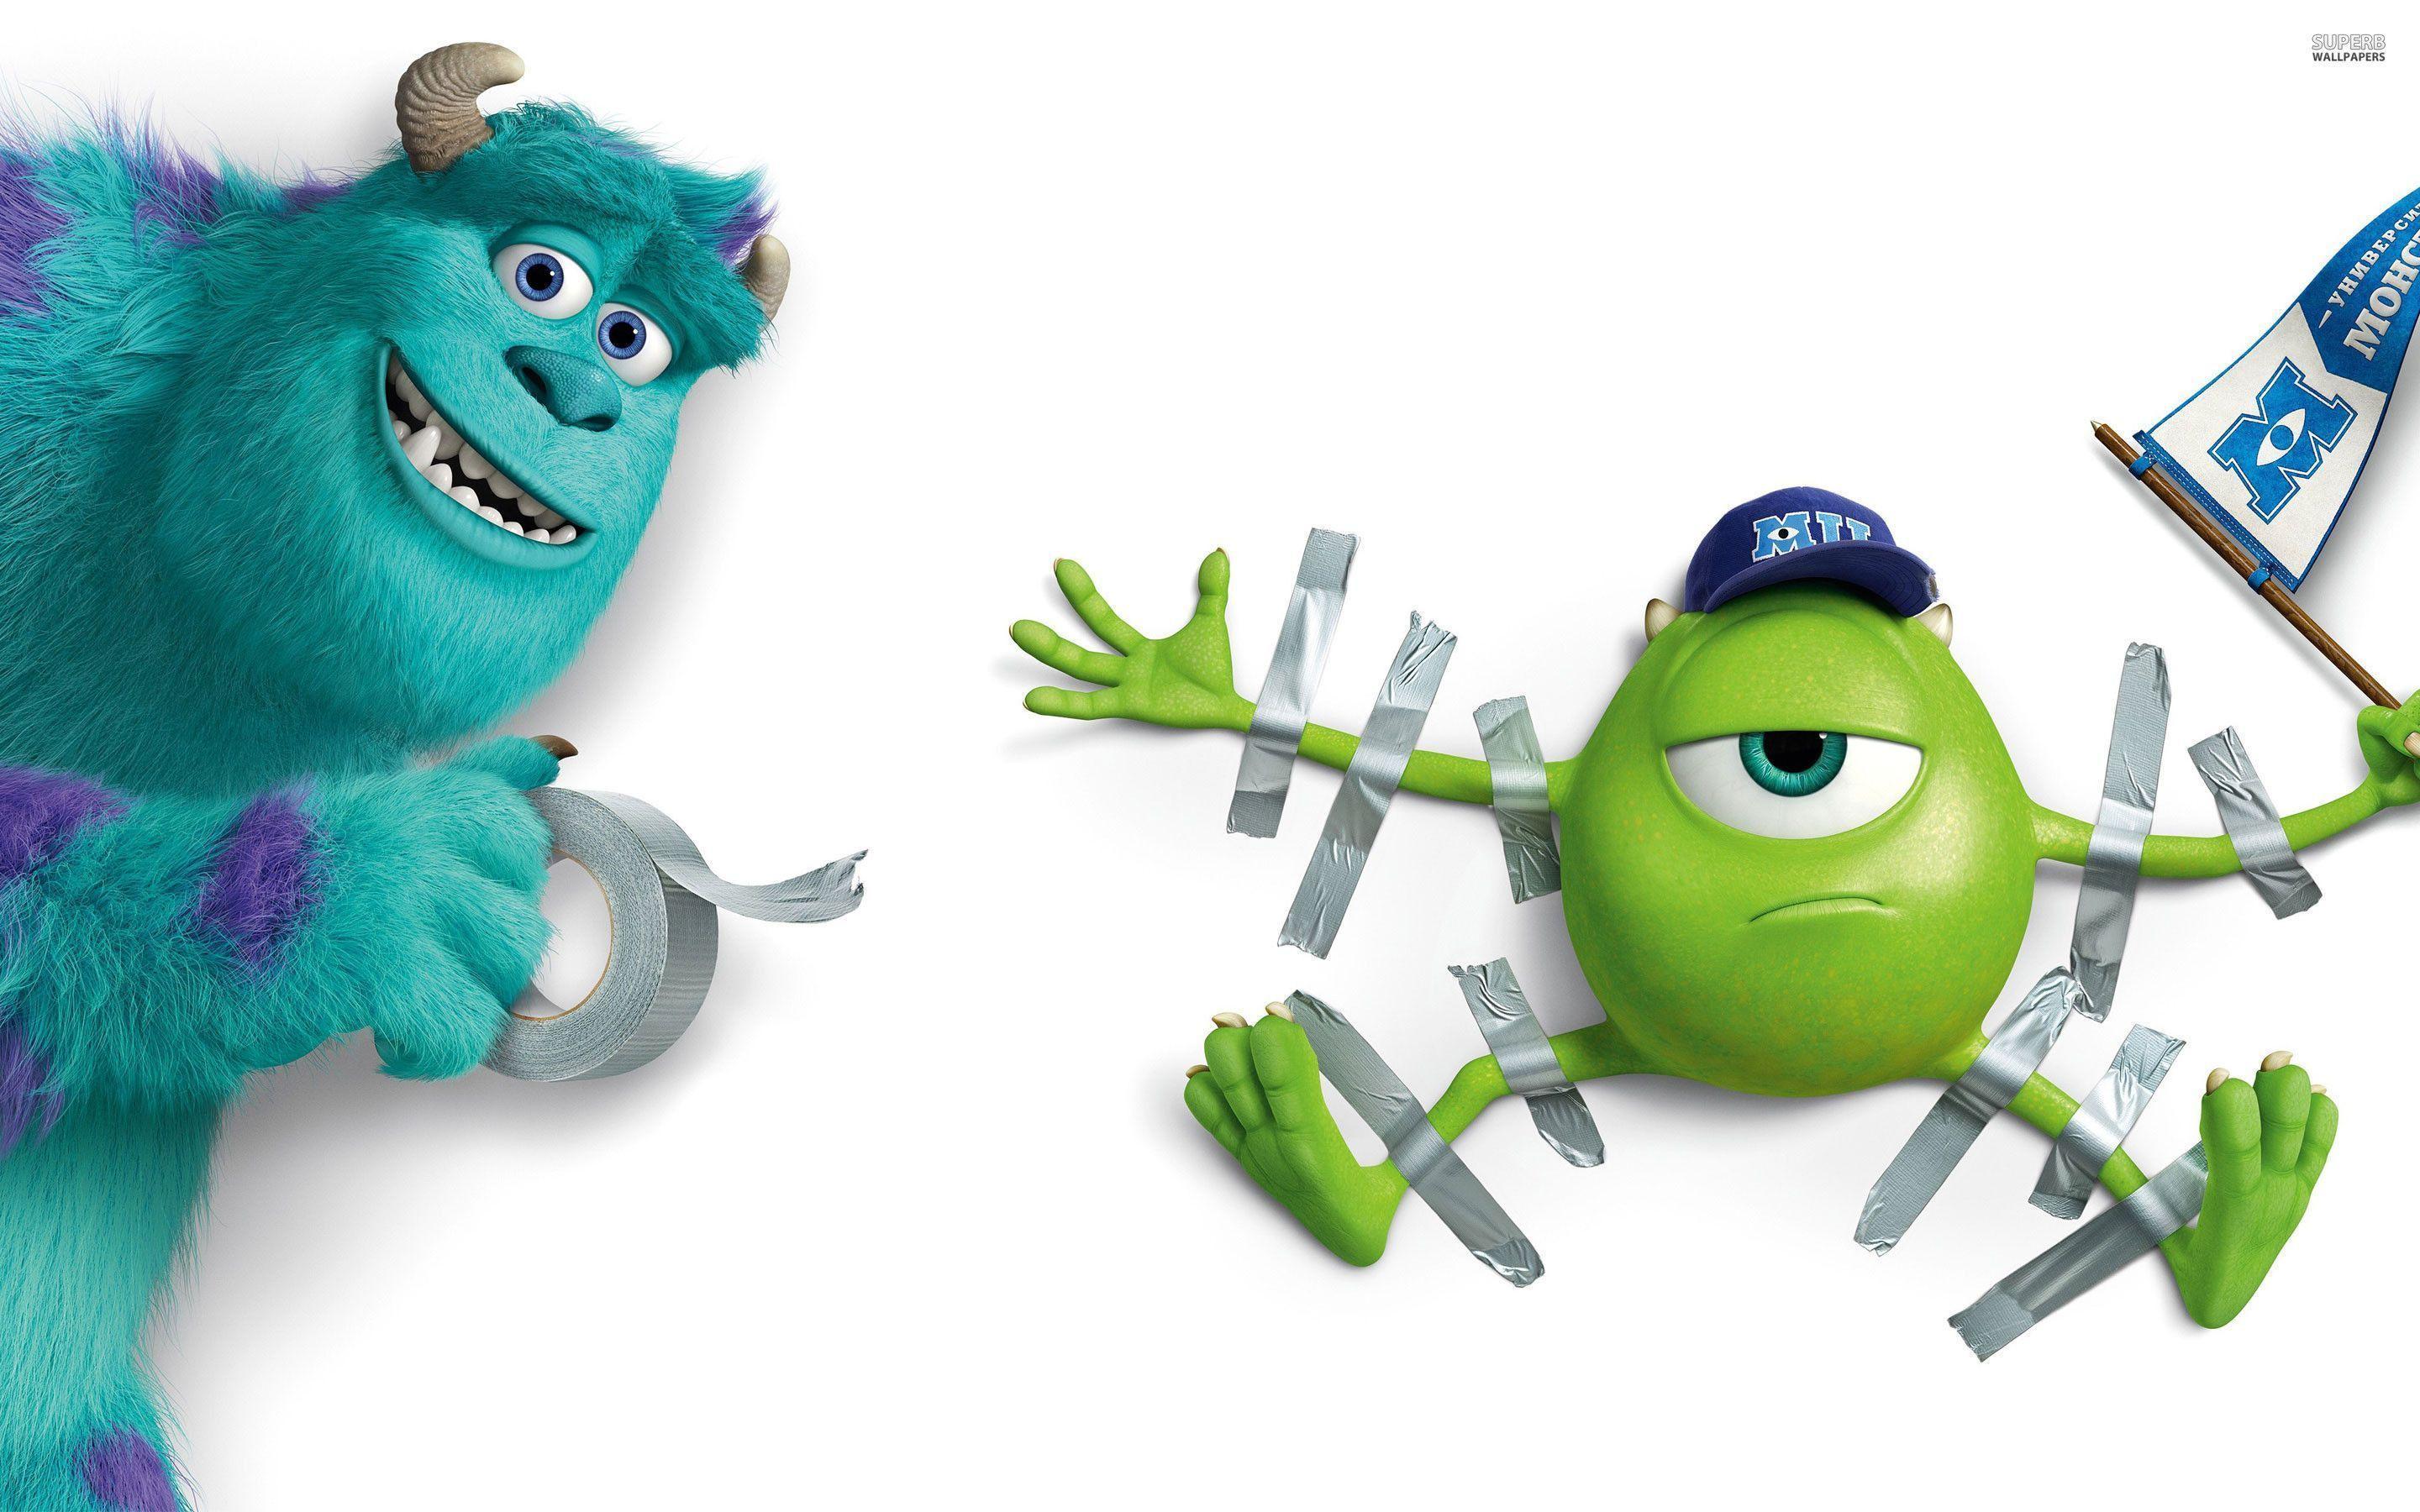 Sulley and Mike Wazowski